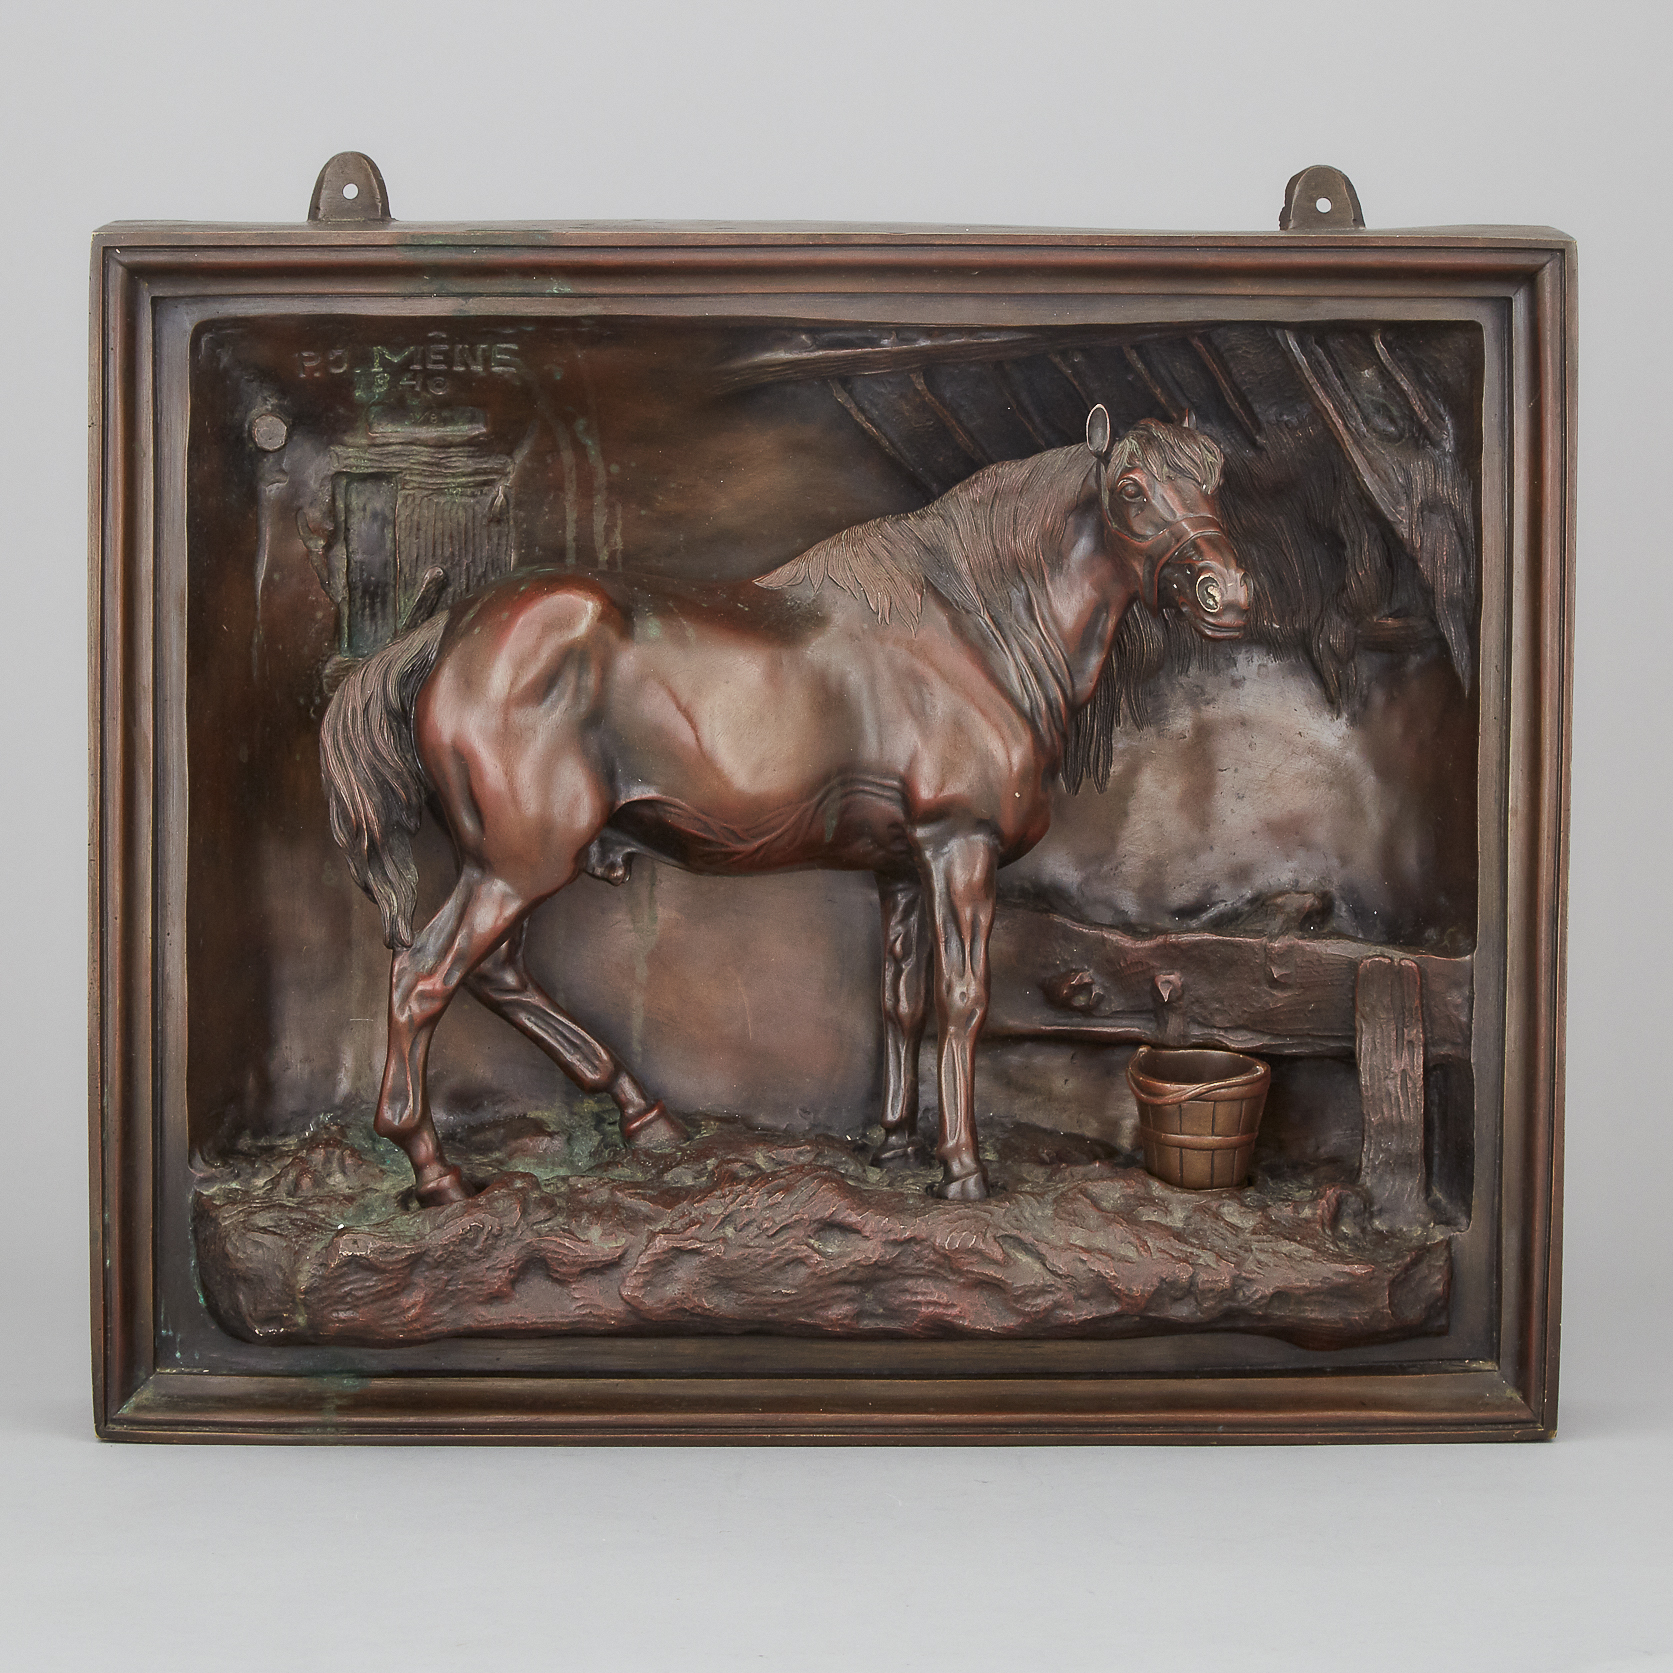 A Bronze Diorama of a Race Horse in a Stable, after Pierre-Jules Mêne (French, 1810-1879)